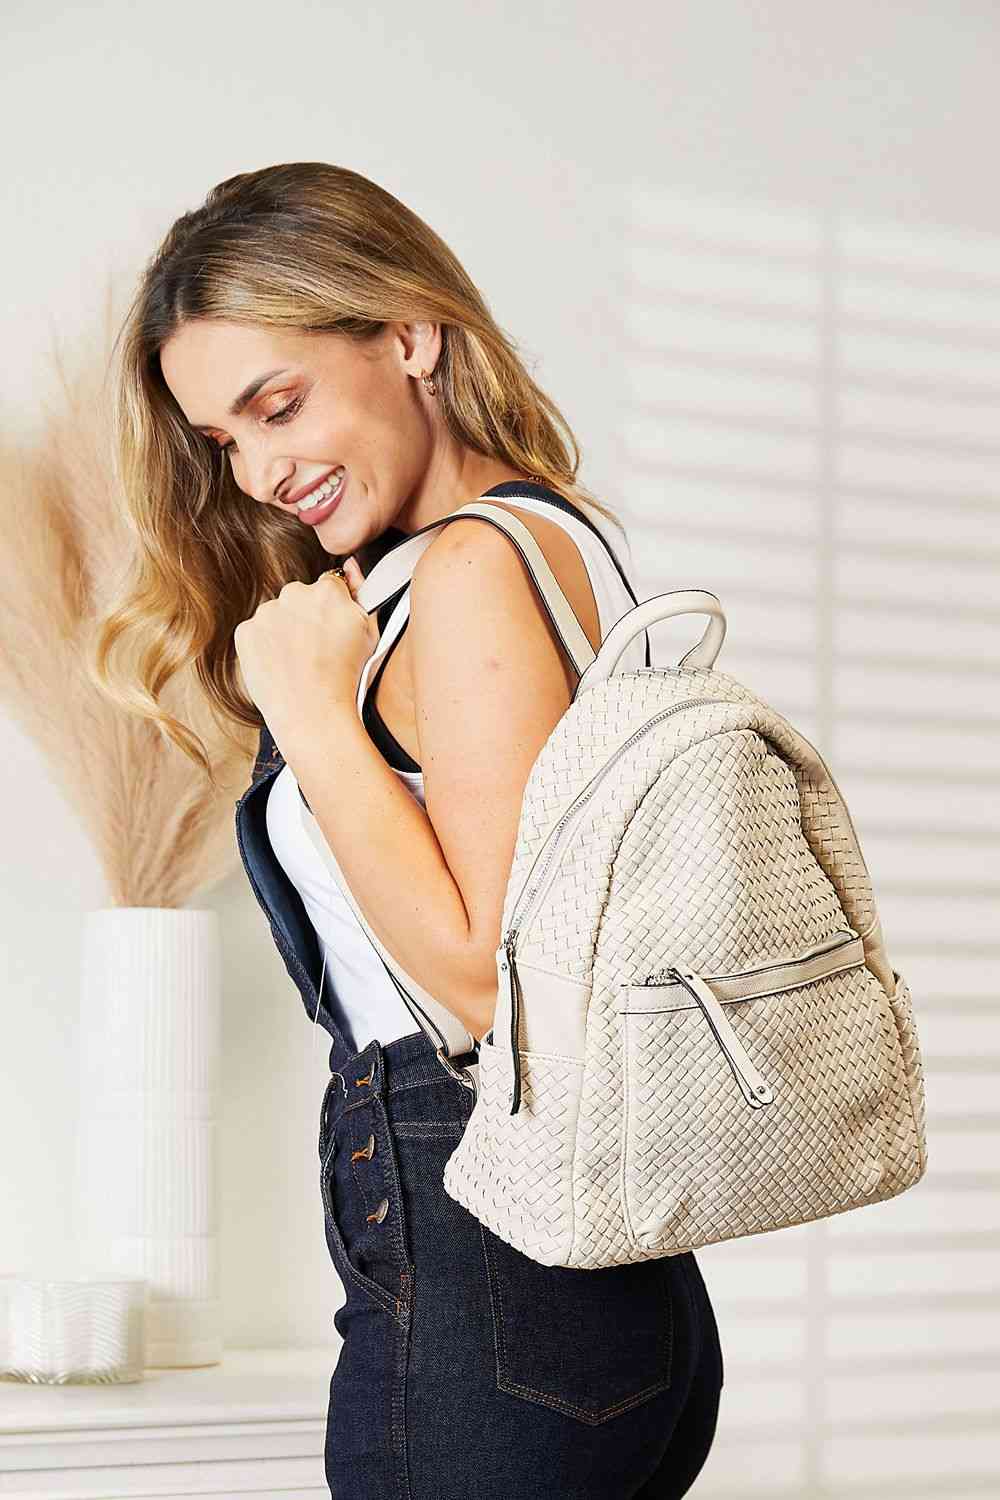 PU Leather Backpack - Kawaii Stop - Backpack, Durable Material, Elegant Design, Everyday Use, Fashion Forward, Fashionable Accessory, Large Size, Must-Have, Organized Essentials, PU Leather, Quality Craftsmanship, Ship from USA, SHOMICO, Spacious Compartments, Stylish and Functional, Women's Accessories